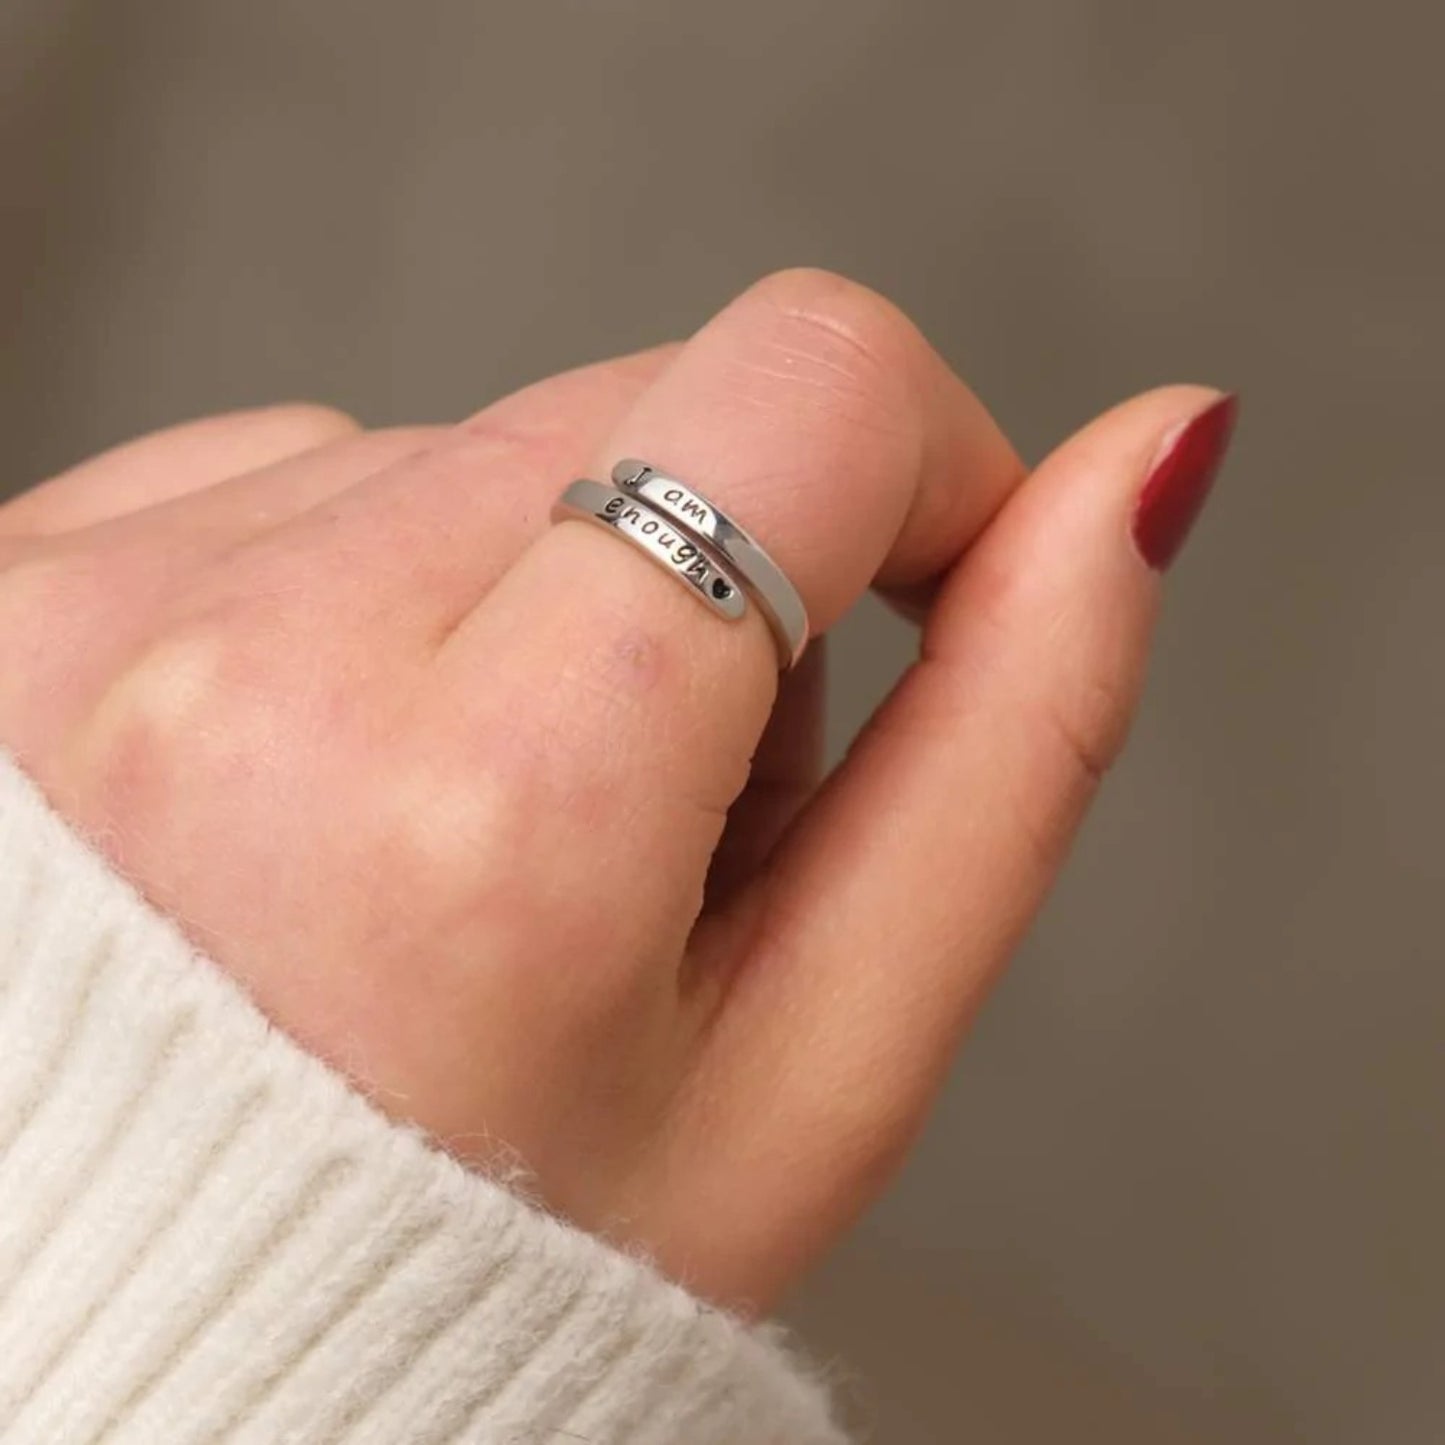 "I AM ENOUGH" Engraved Bypass Ring